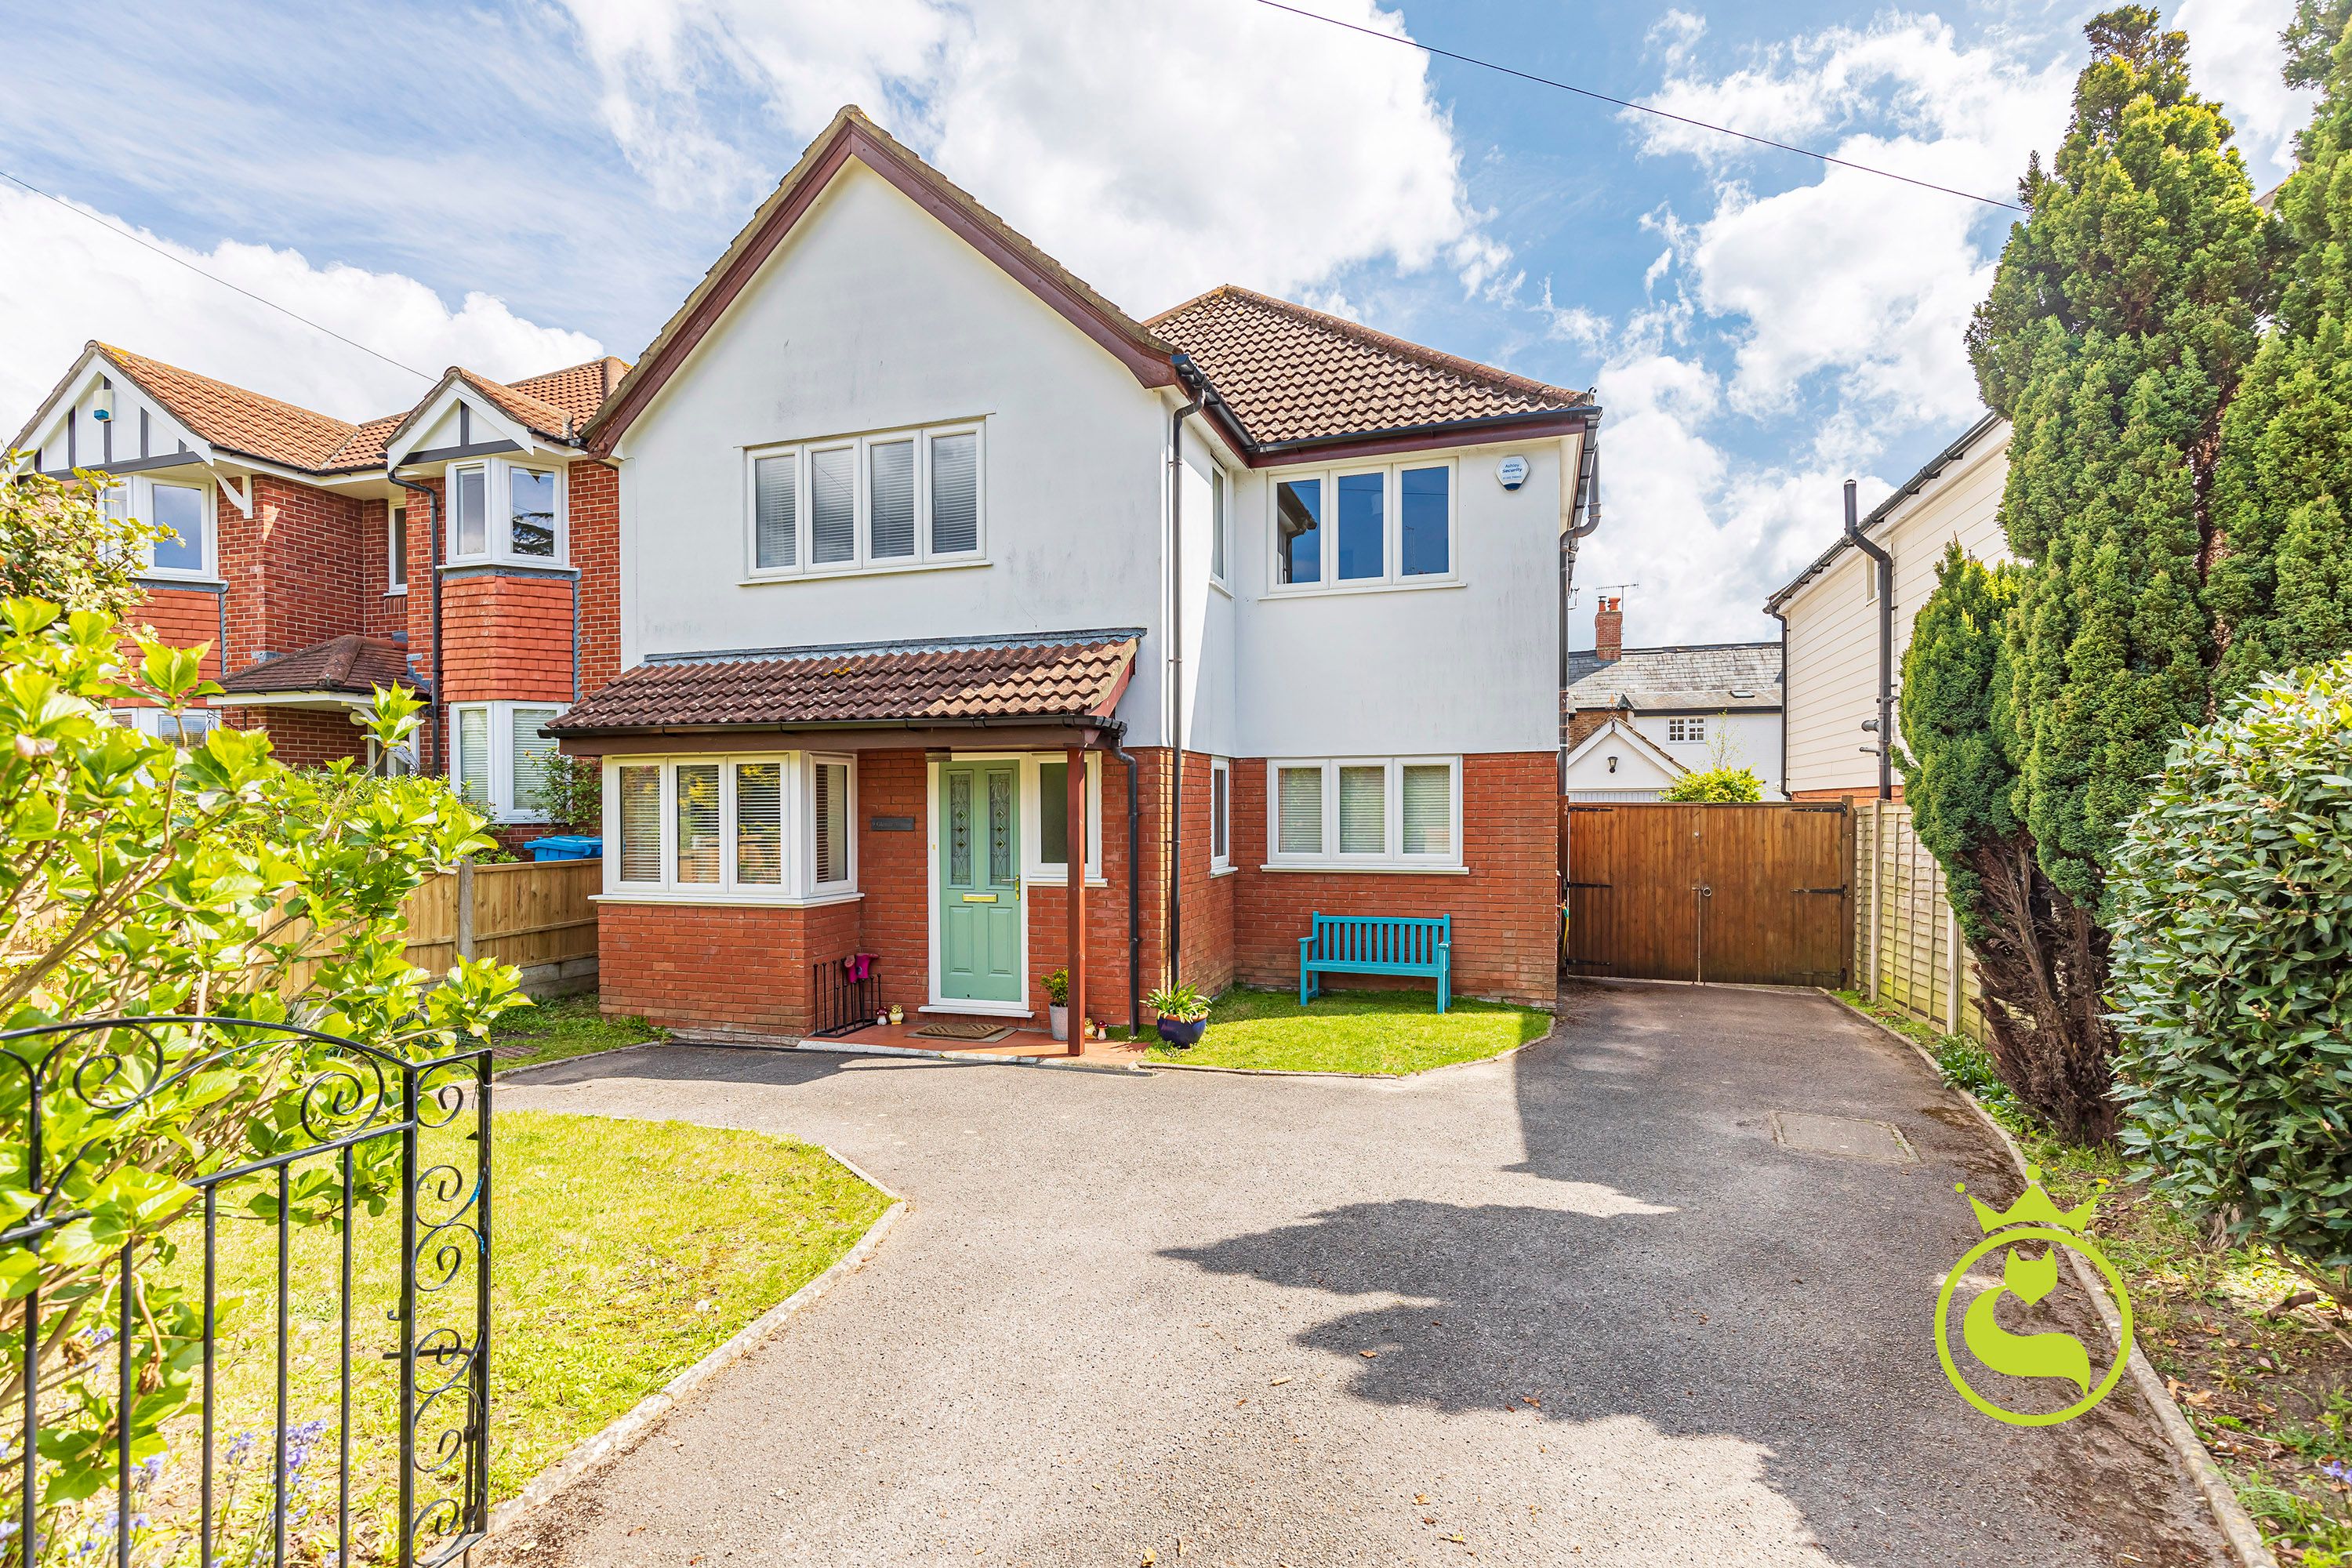 **LAUNCHING SATURDAY 14TH MAY- BY APPOINTMENT ONLY** A well-presented four bedroom, three reception detached family sized home with south facing garden, driveway, and garage. Falling into the ever Lilliput Infant and Baden Powell Junior school catchments and within walking distance of Ashley Cross & Parkstone train station.